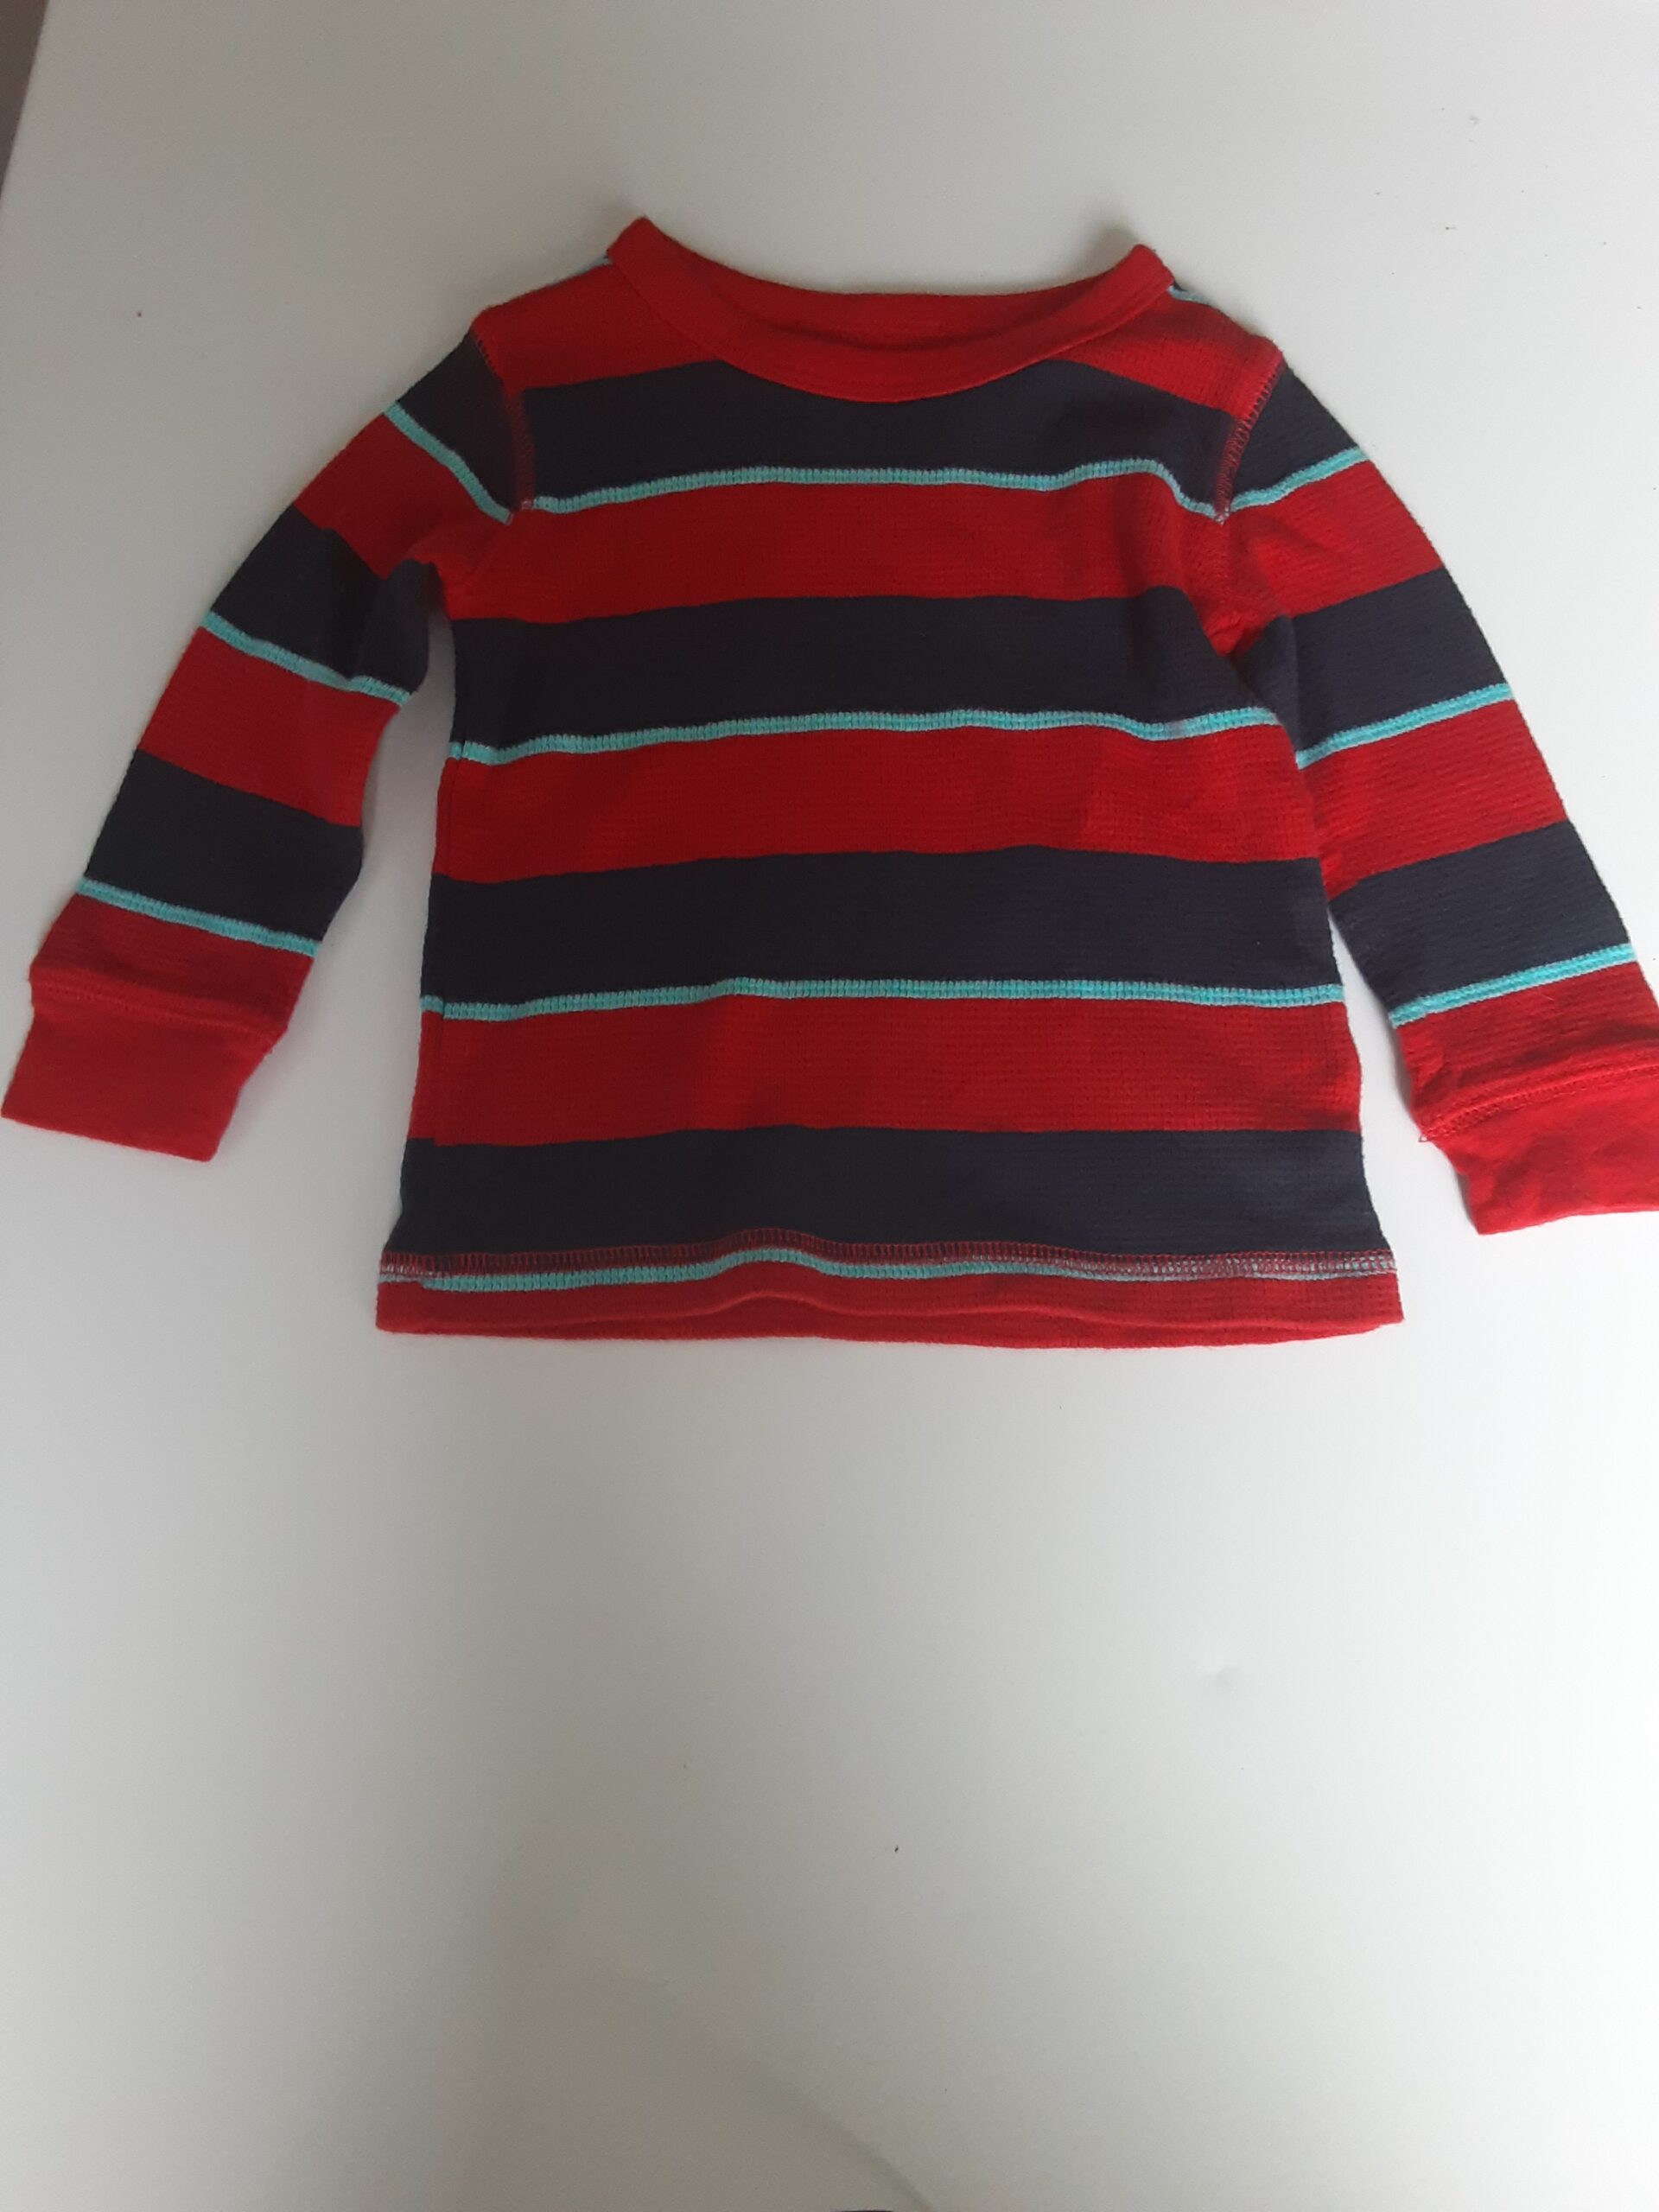 Big thermal tee red and blue